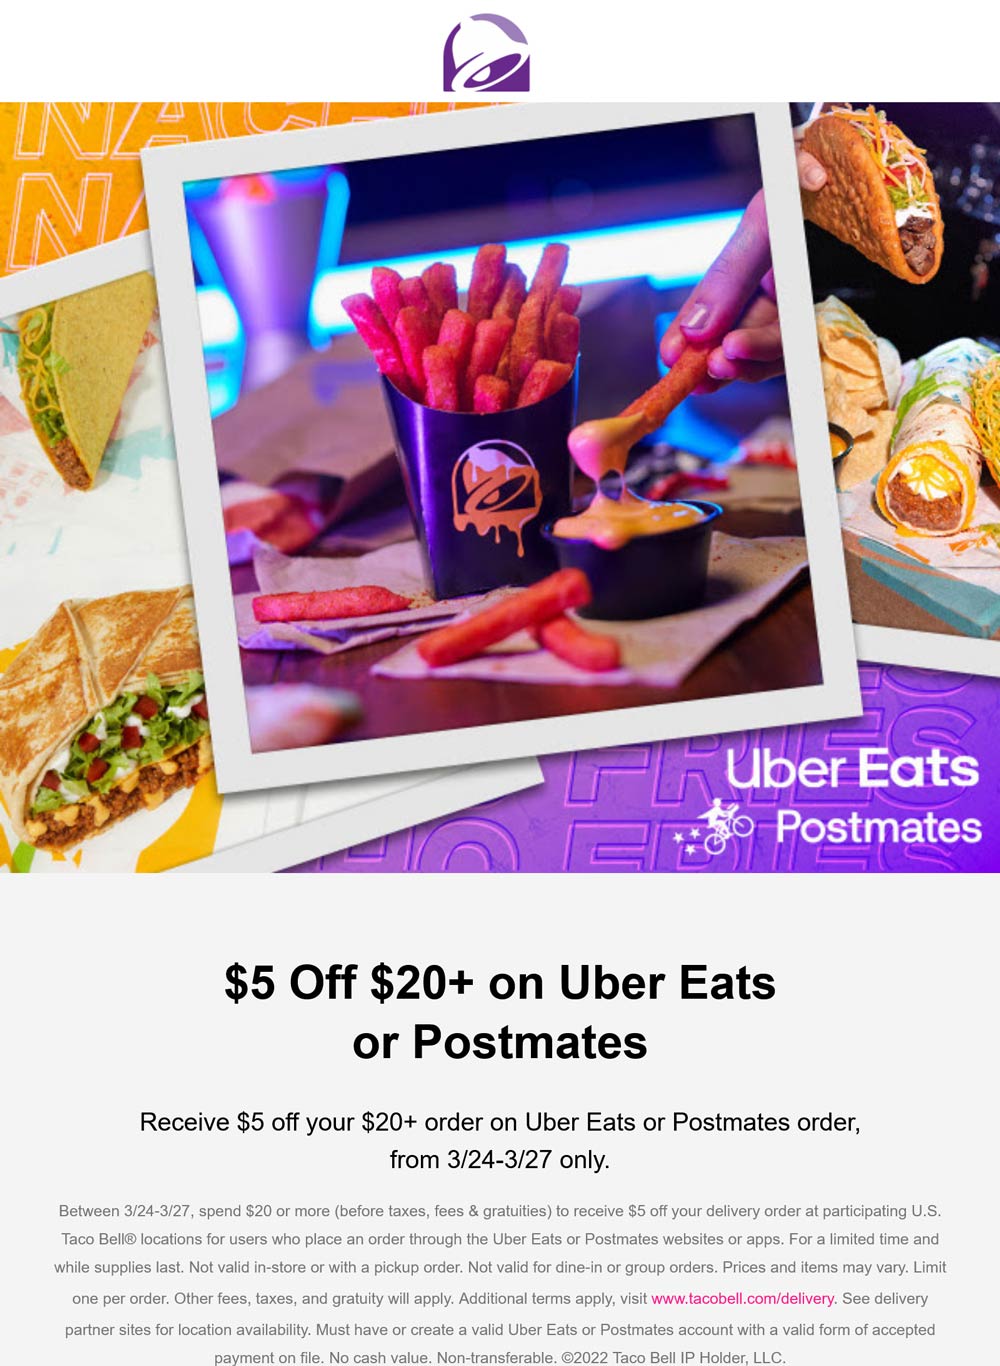 Taco Bell restaurants Coupon  $5 off $20 on delivery at Taco Bell #tacobell 